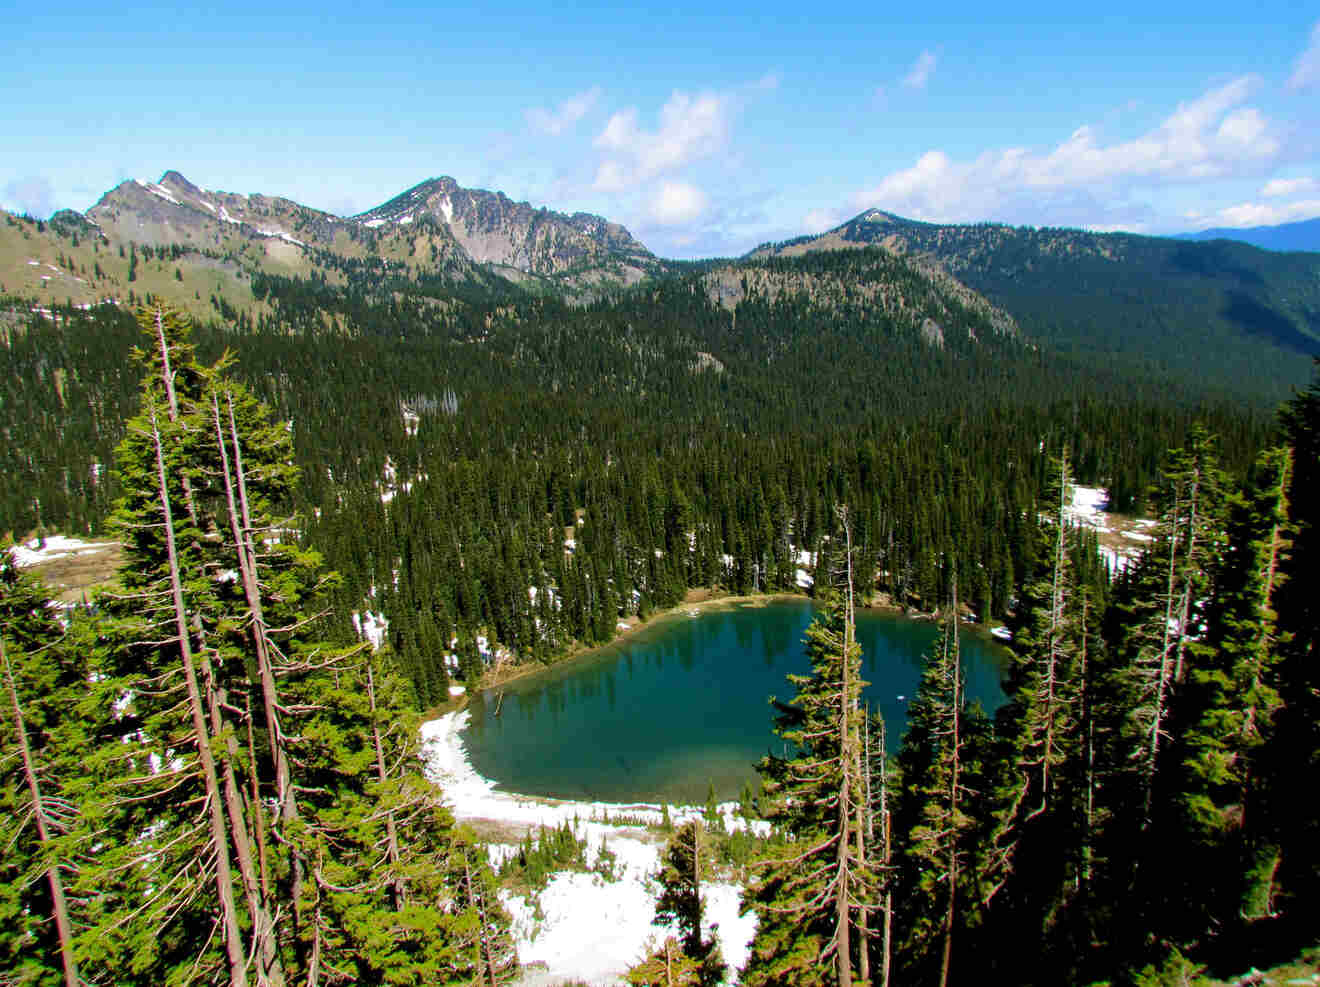 a lake surrounded by trees in the mountains